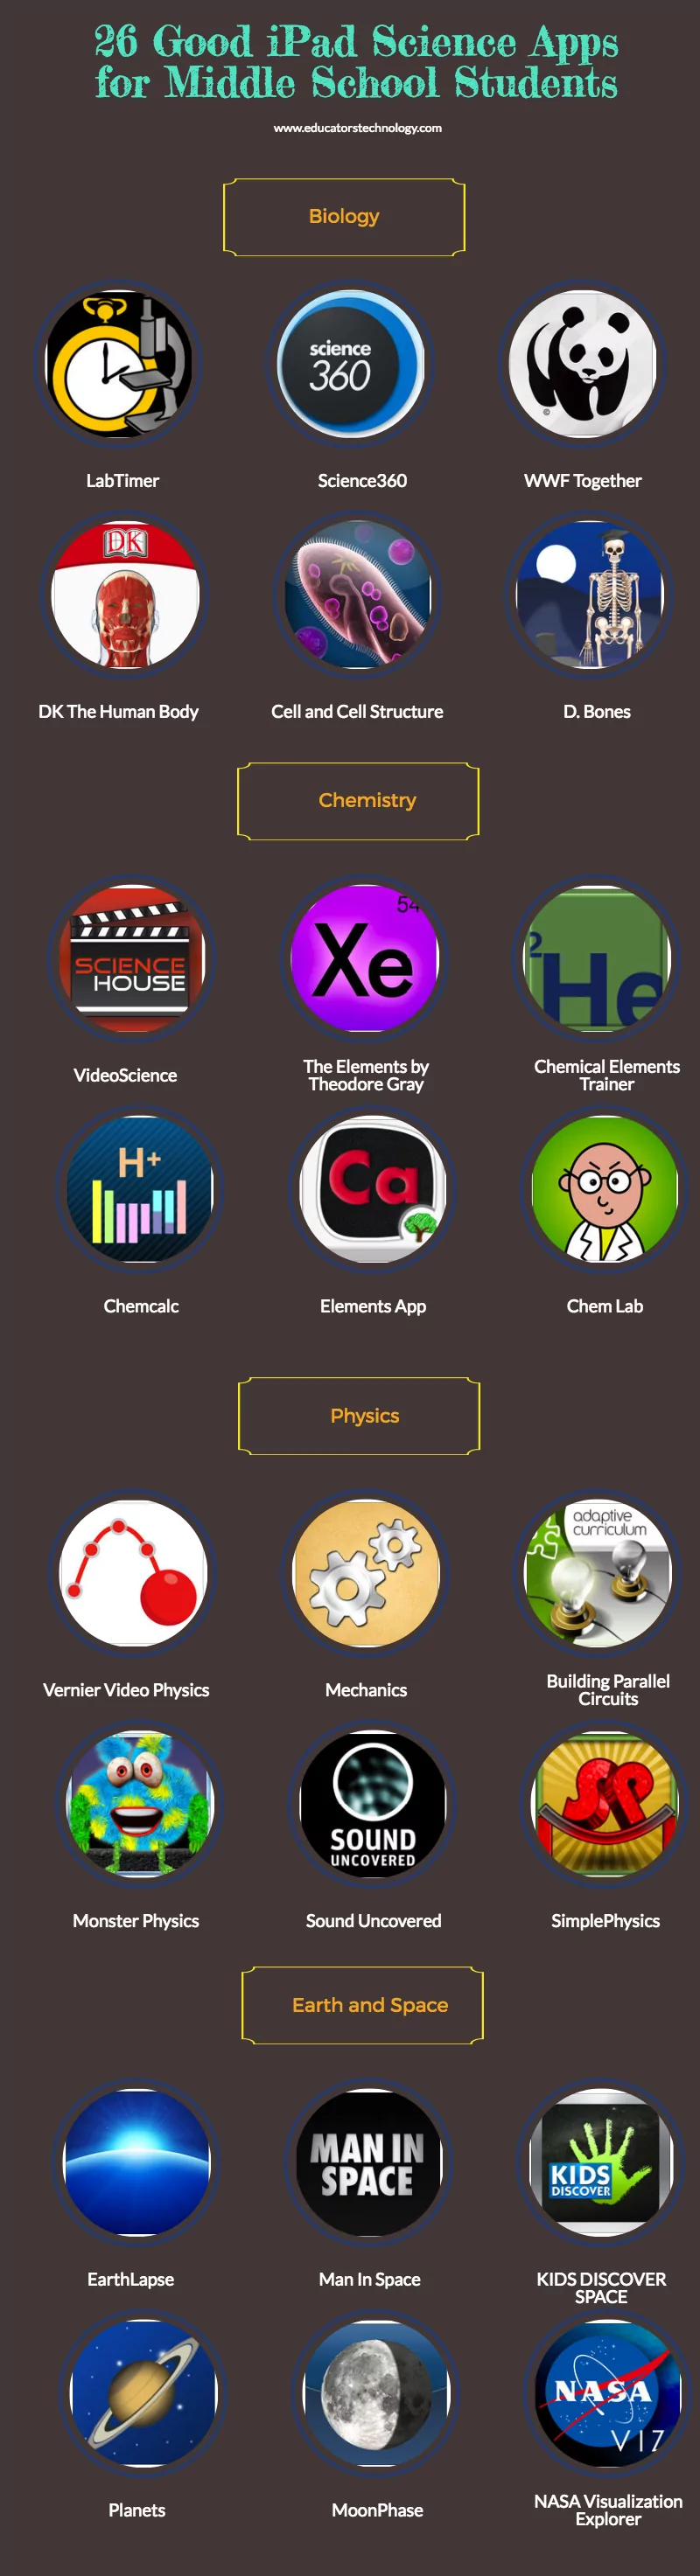 An Interesting Visual Featuring Some Good iPad Science Apps for Middle School Students